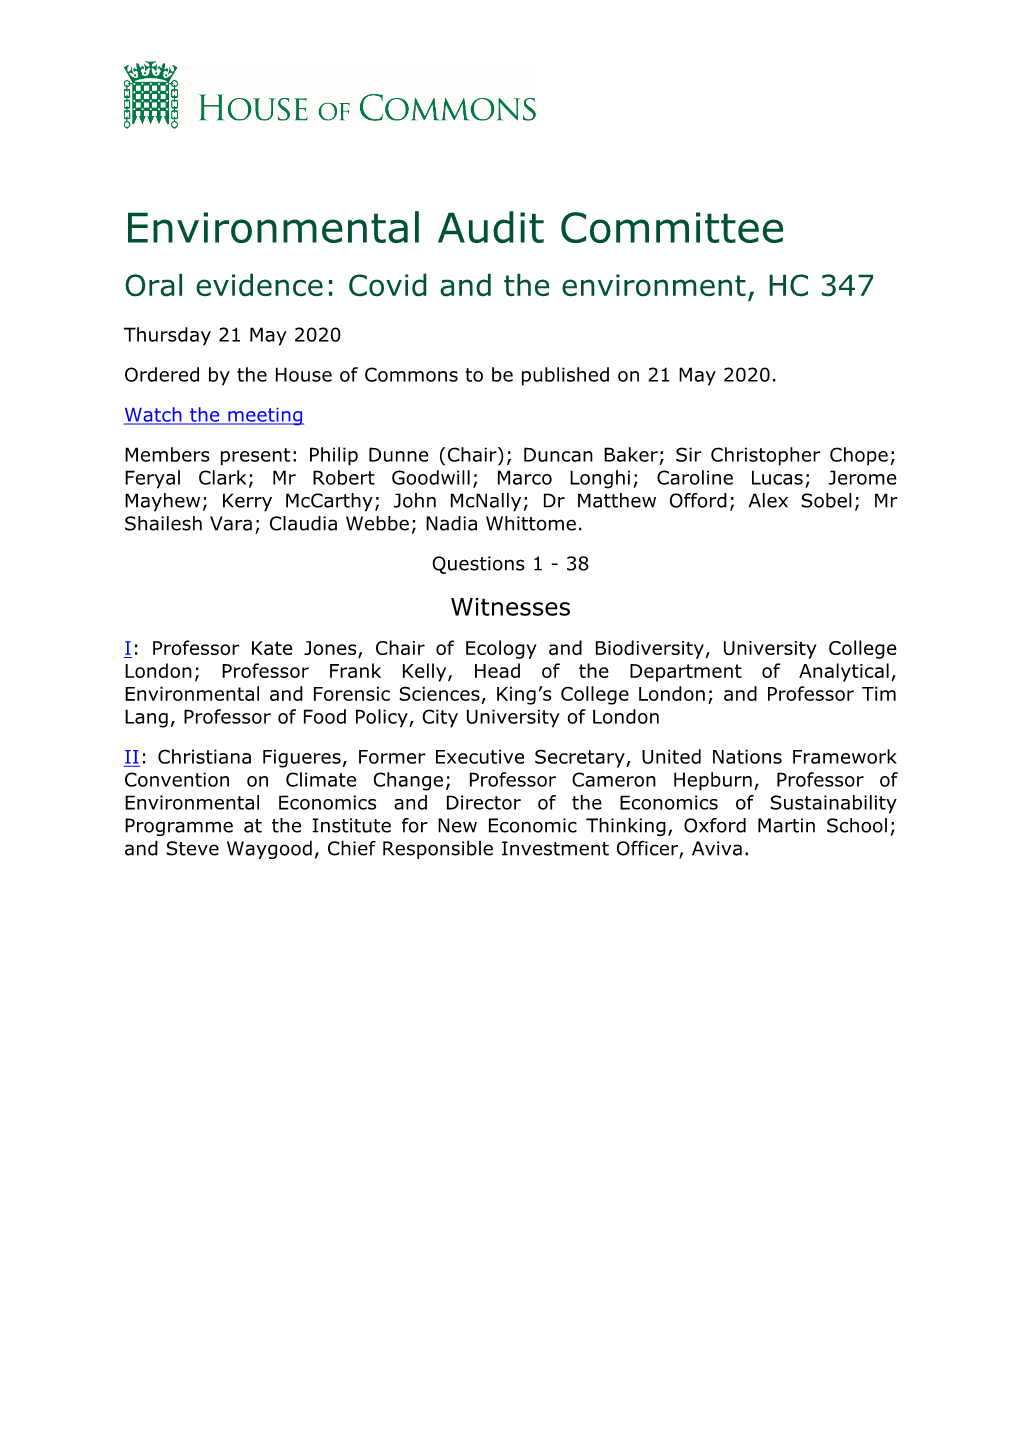 Environmental Audit Committee Oral Evidence: Covid and the Environment, HC 347